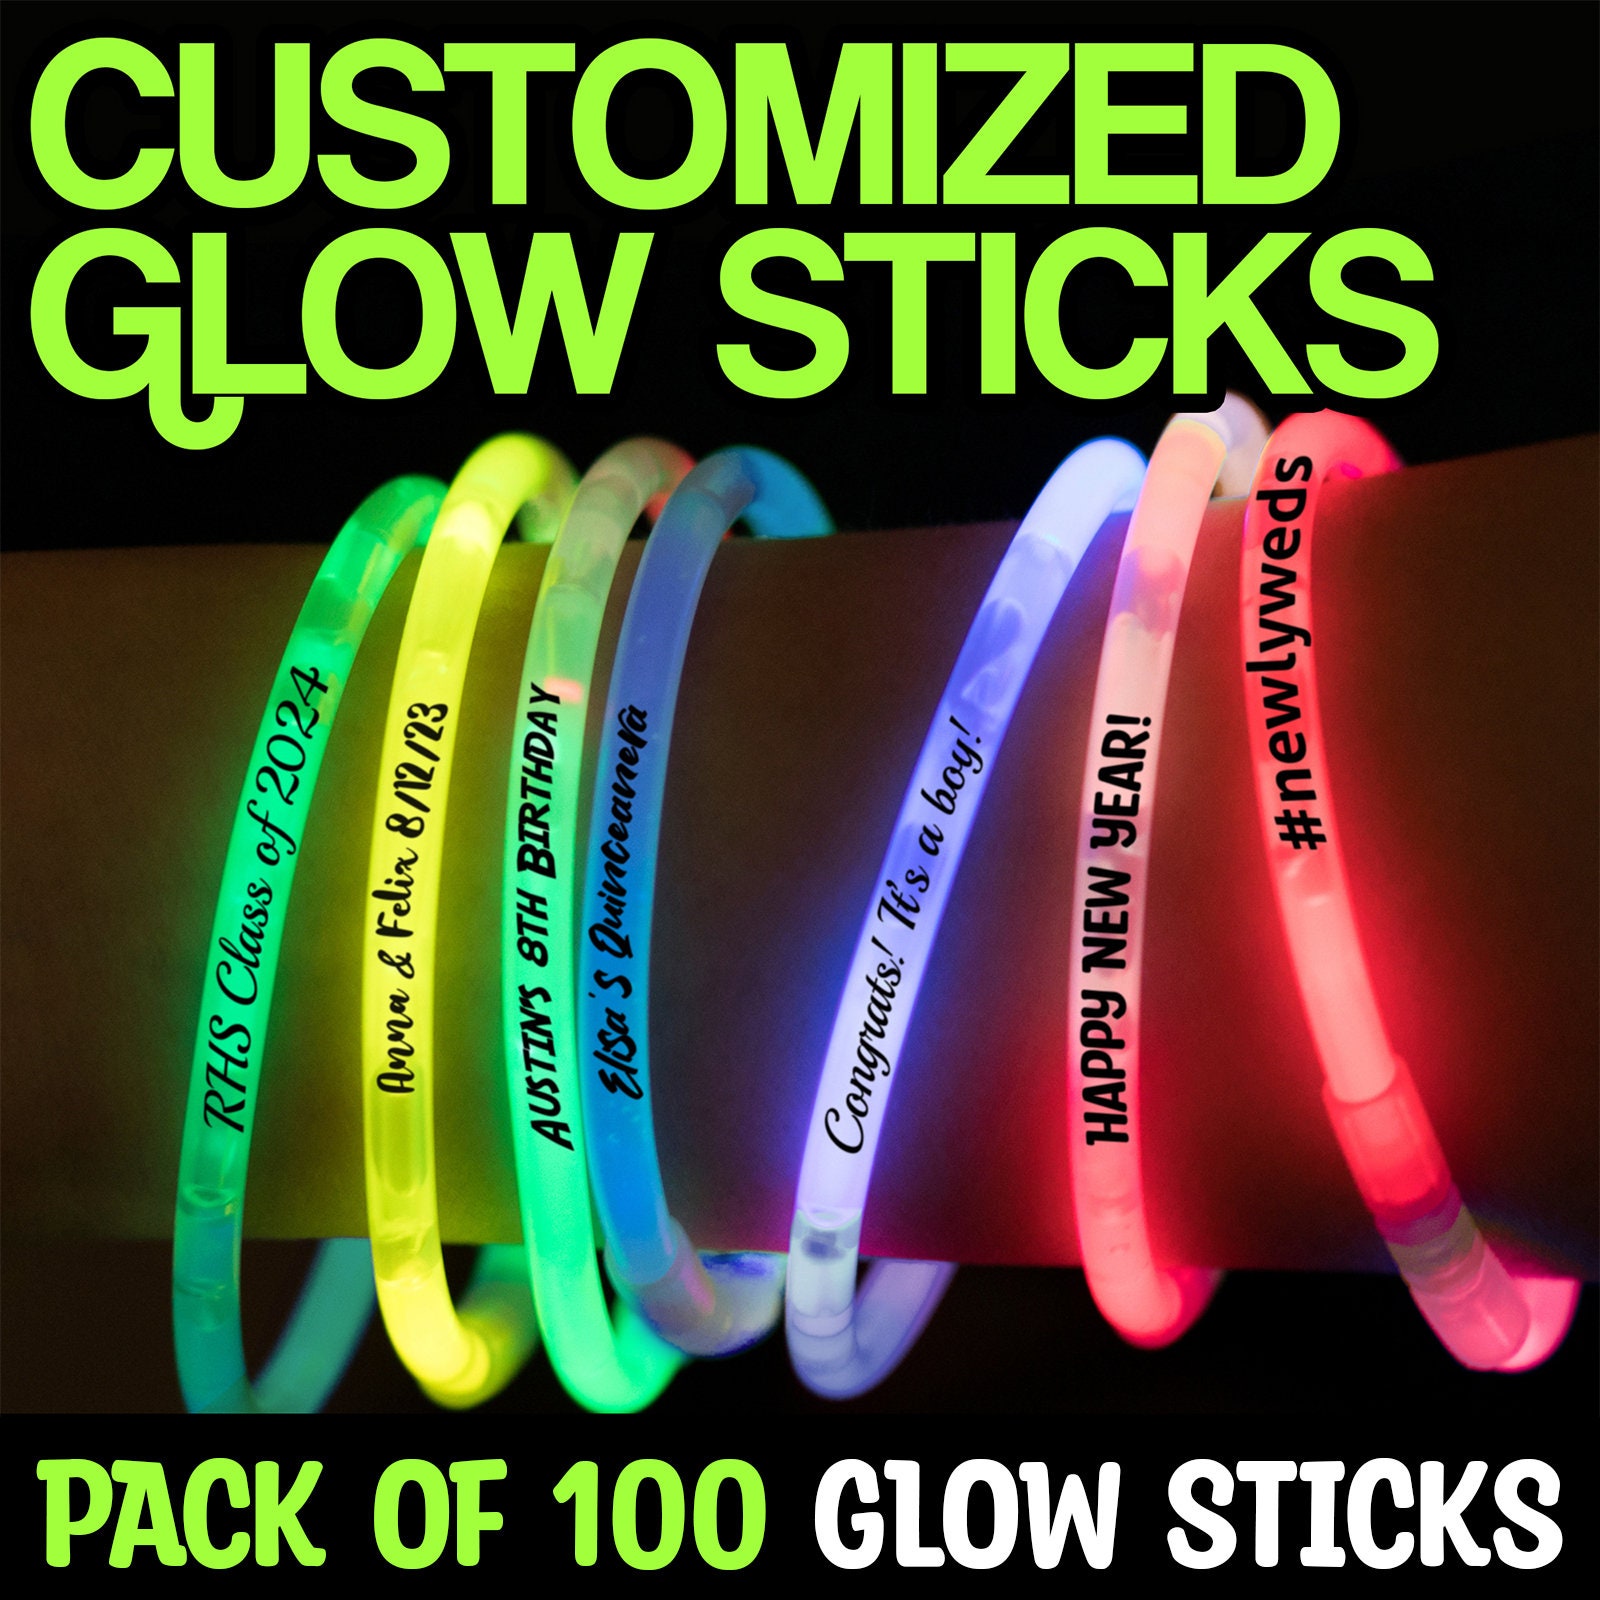 Our Custom Silicone Wristband Specifications